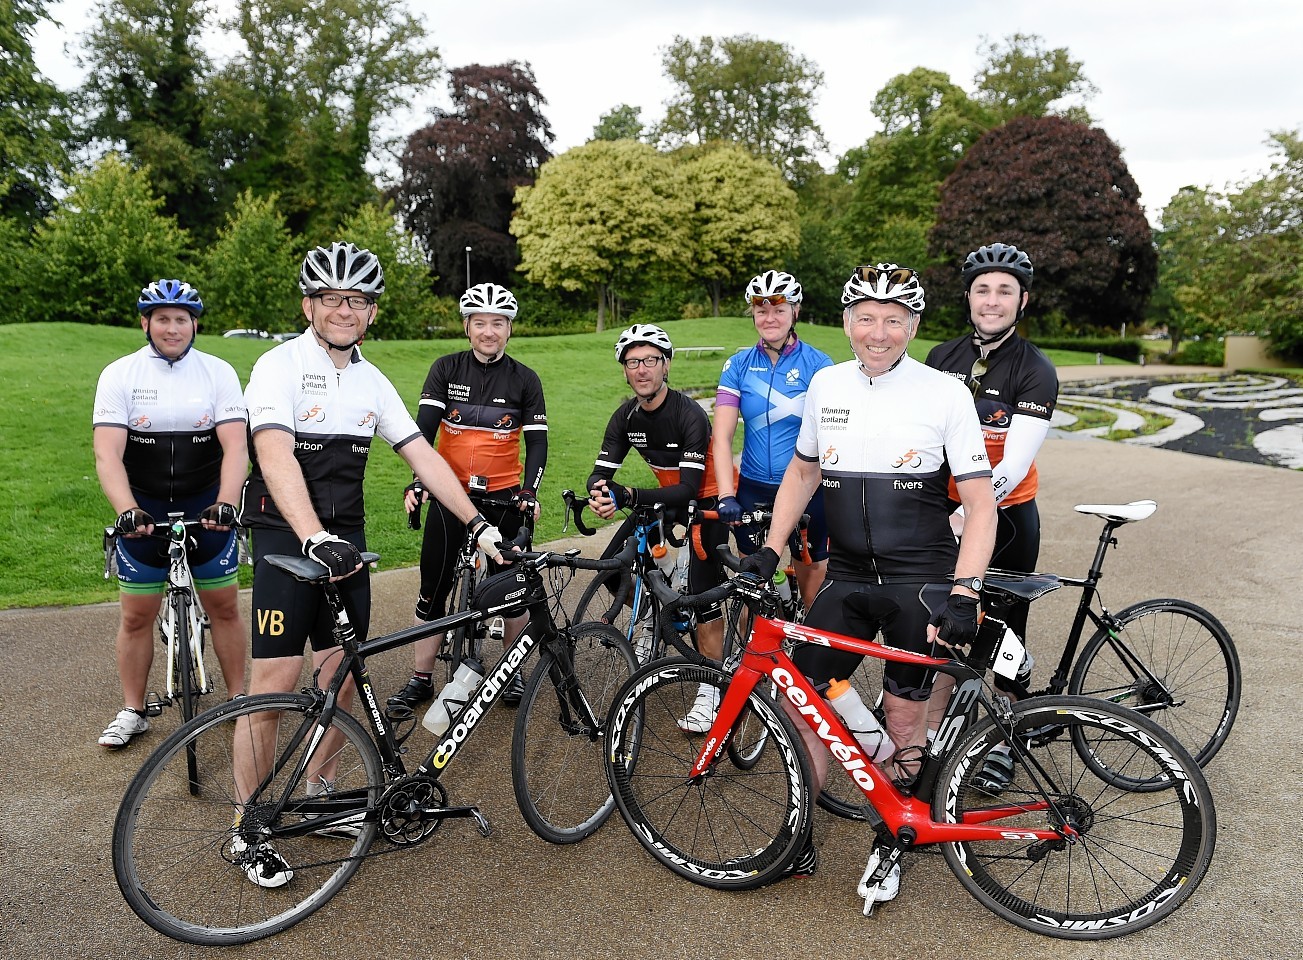 Winning Scotland charity cycle ride round the north of Scotland.    (L-R) Max Chassels, Nigel Chapman, Mark Christie, Richard Wadsworth, Fiona Duncan, Ian Ord and Iain Harper after completing their route.